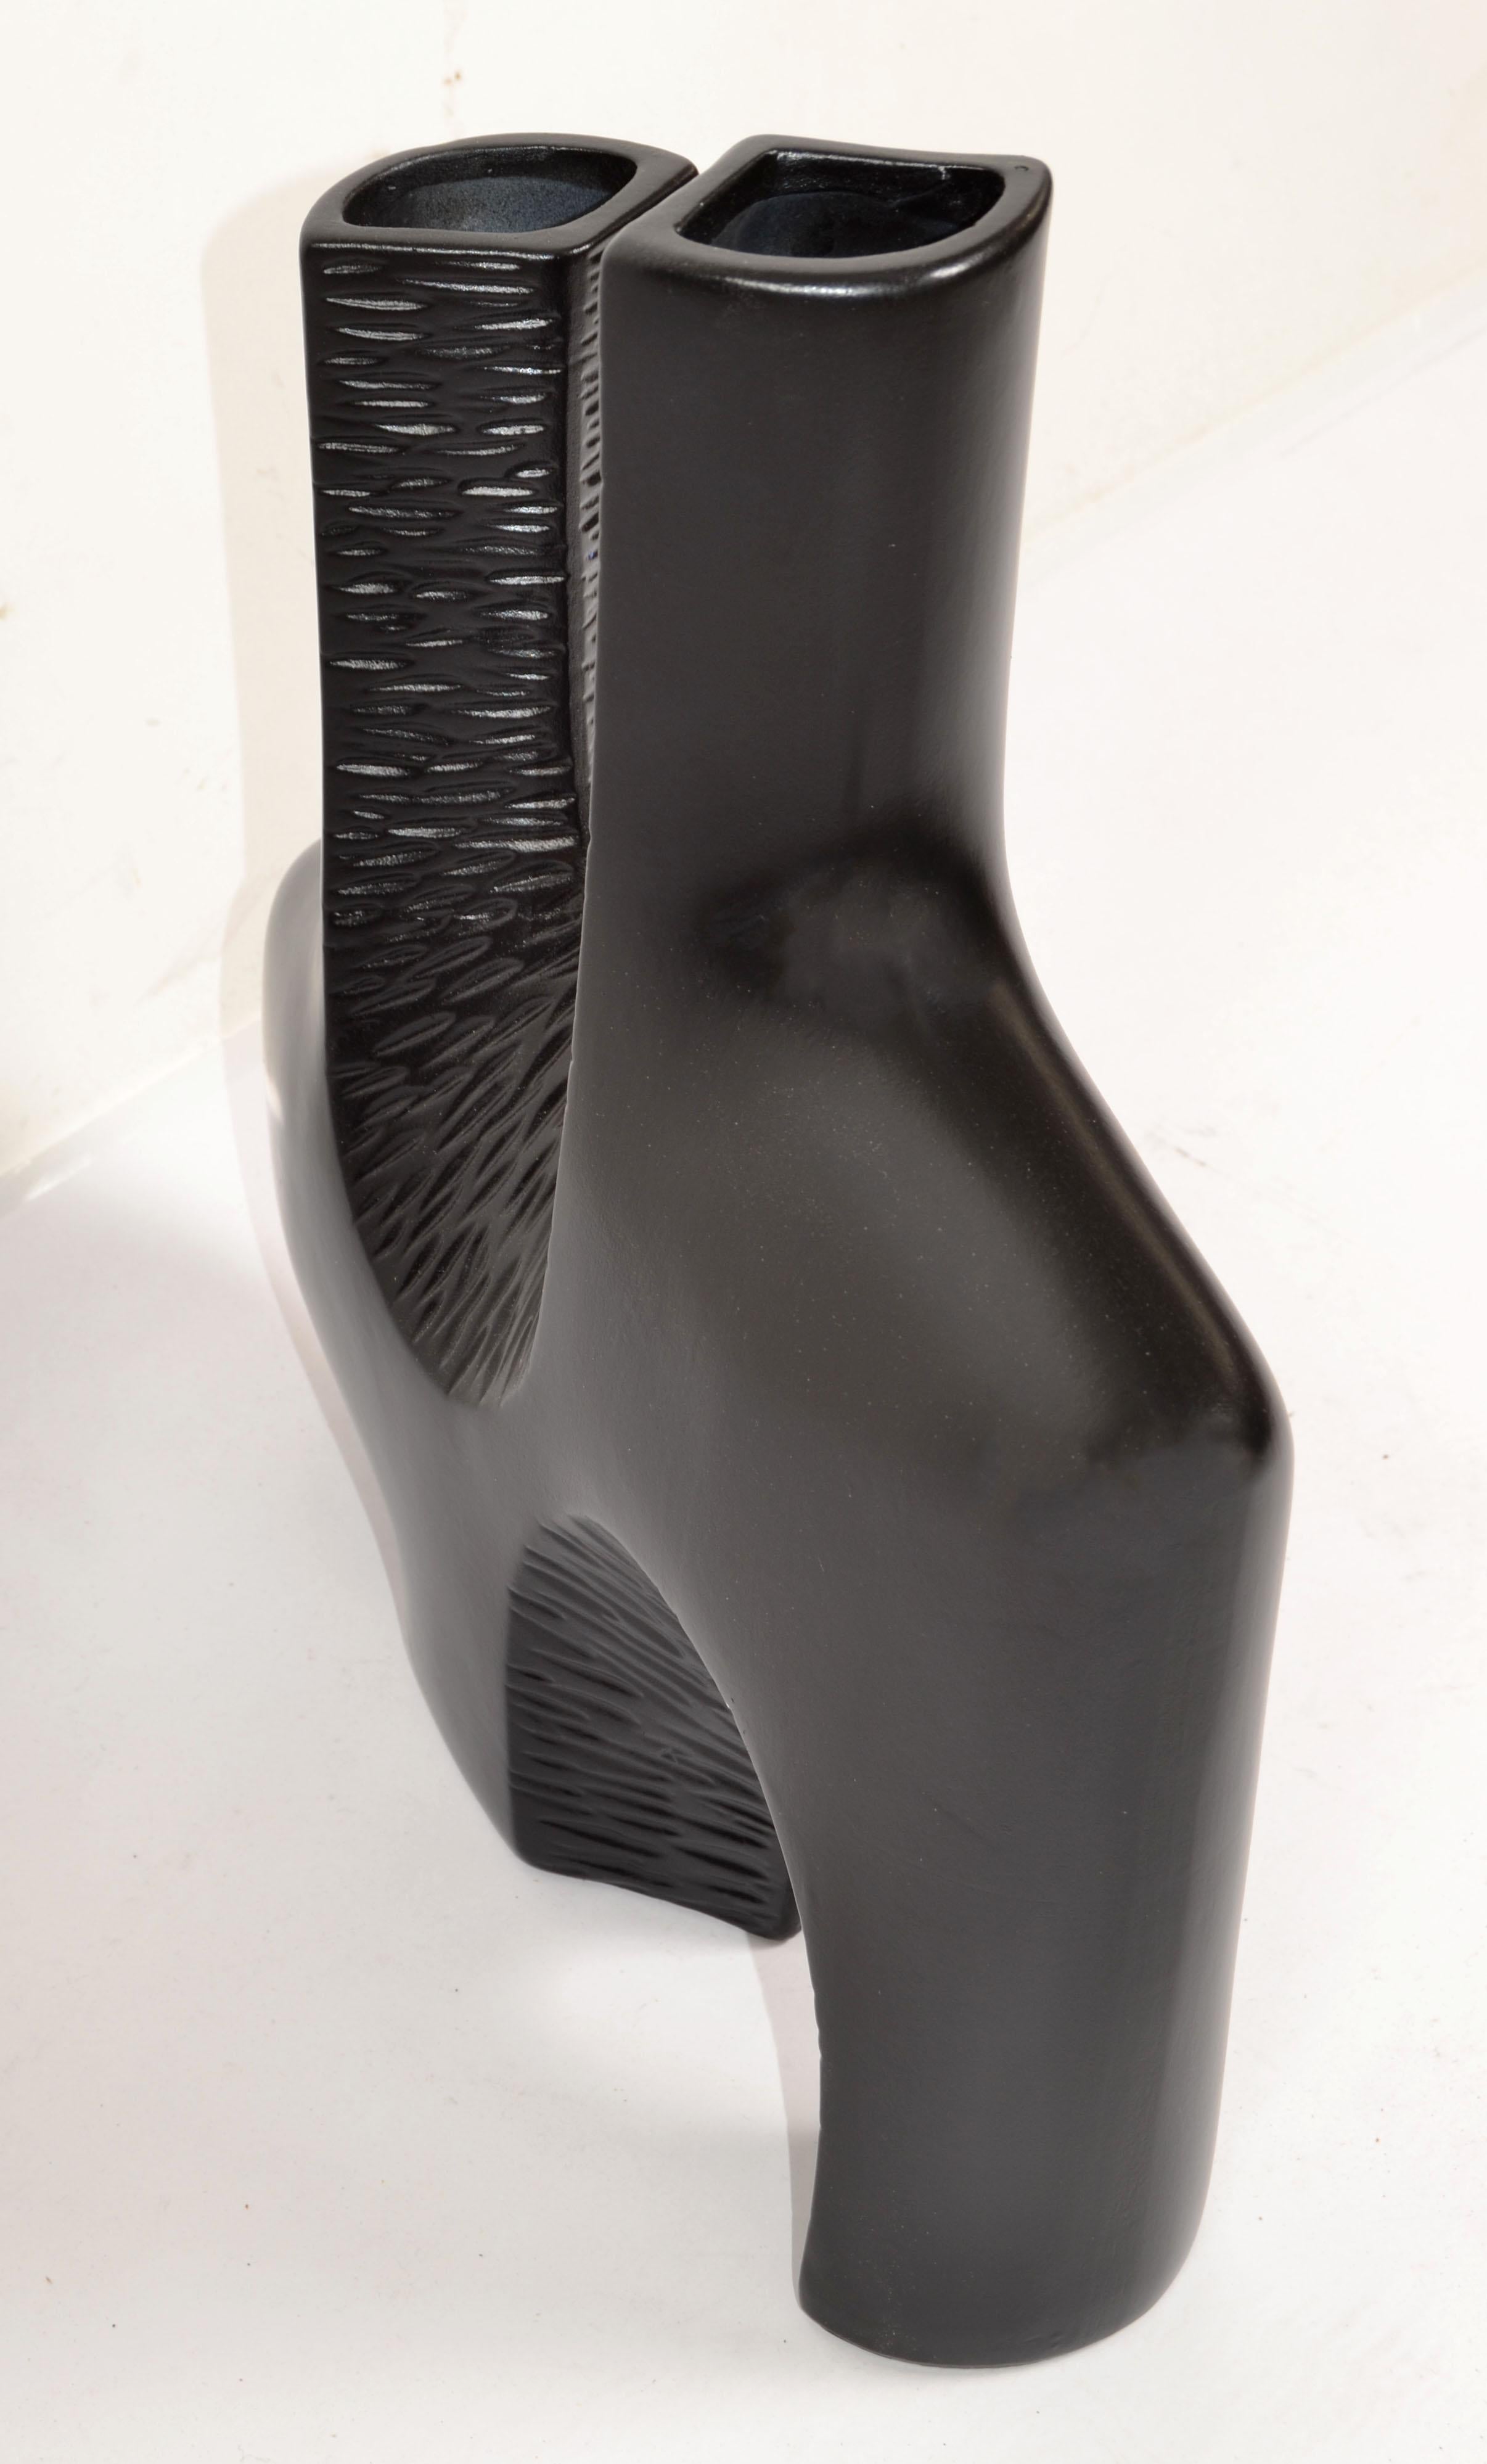 Ceramic 1980s Abstract Textured Two Neck Vase Vessel Black Finish Mid-Century Modern For Sale